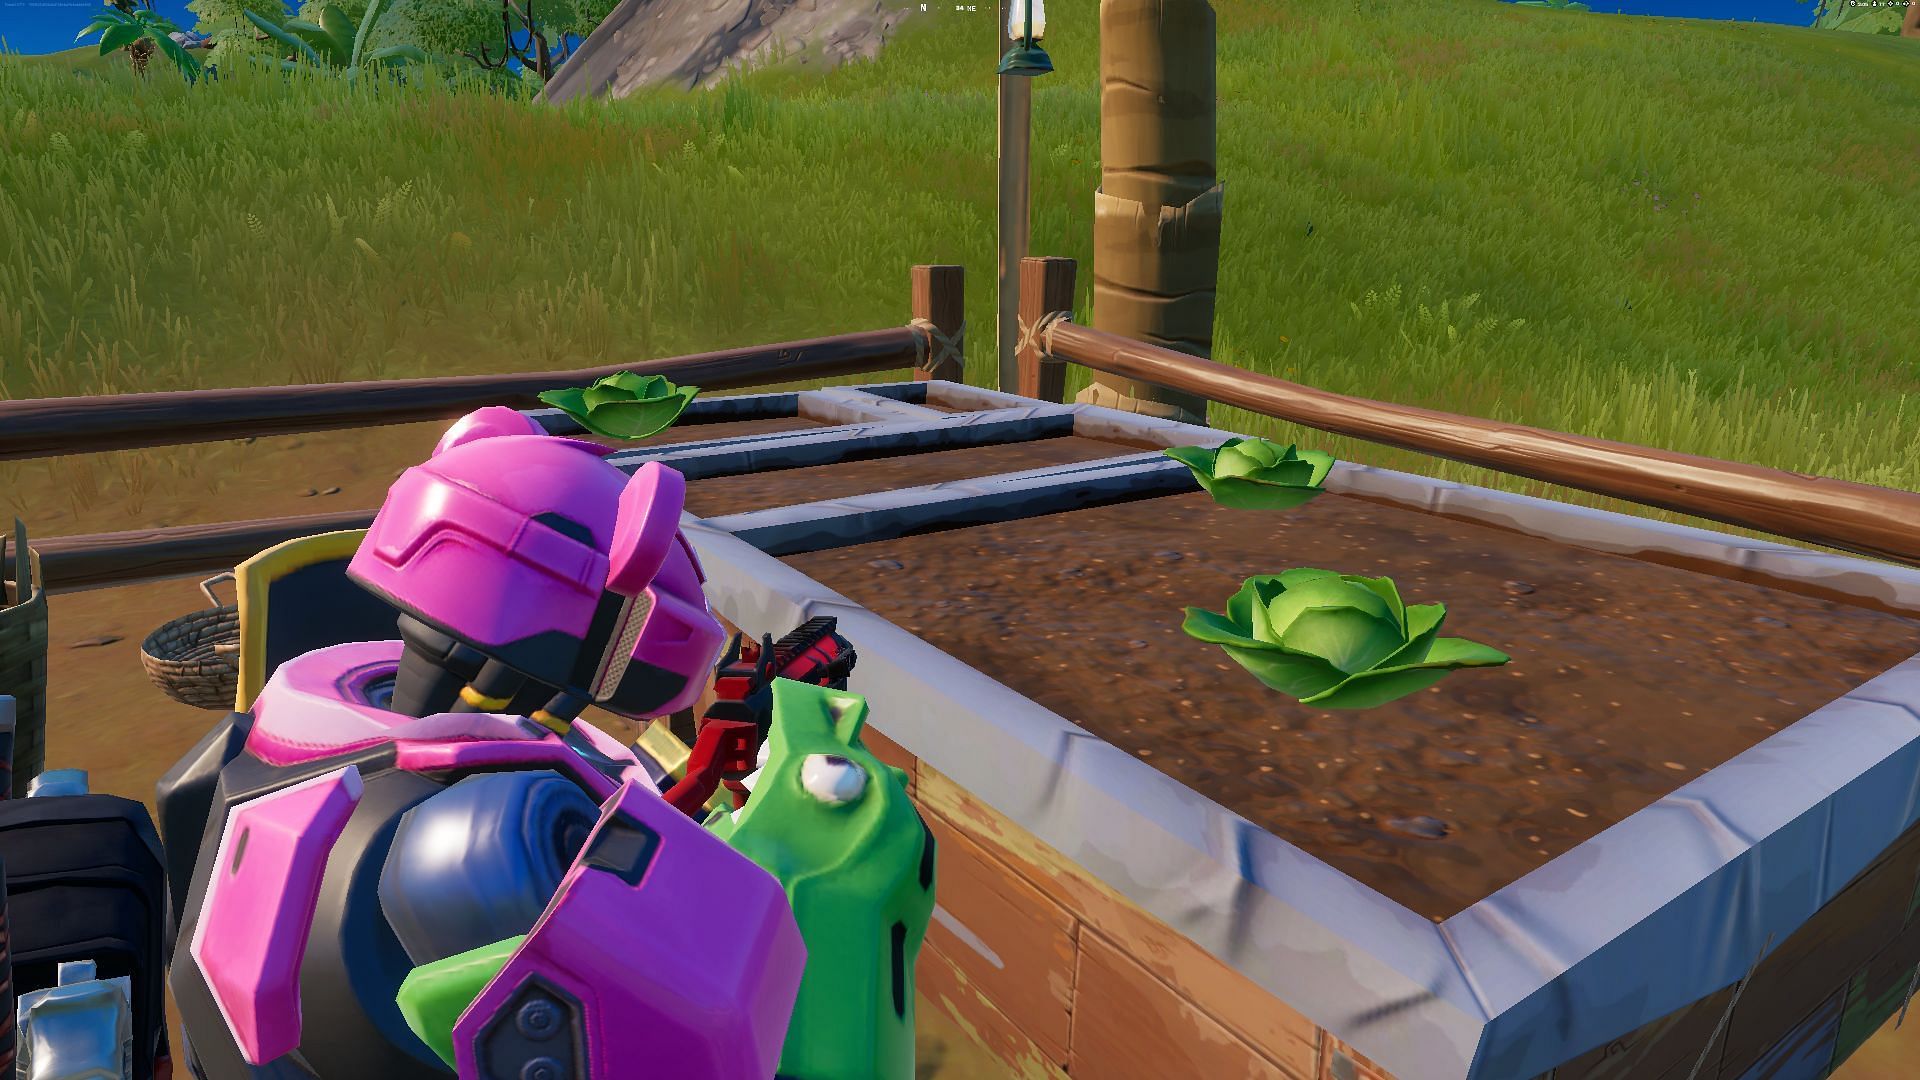 Let the cabbage hit the floor! (Image via Epic Games/Fortnite)